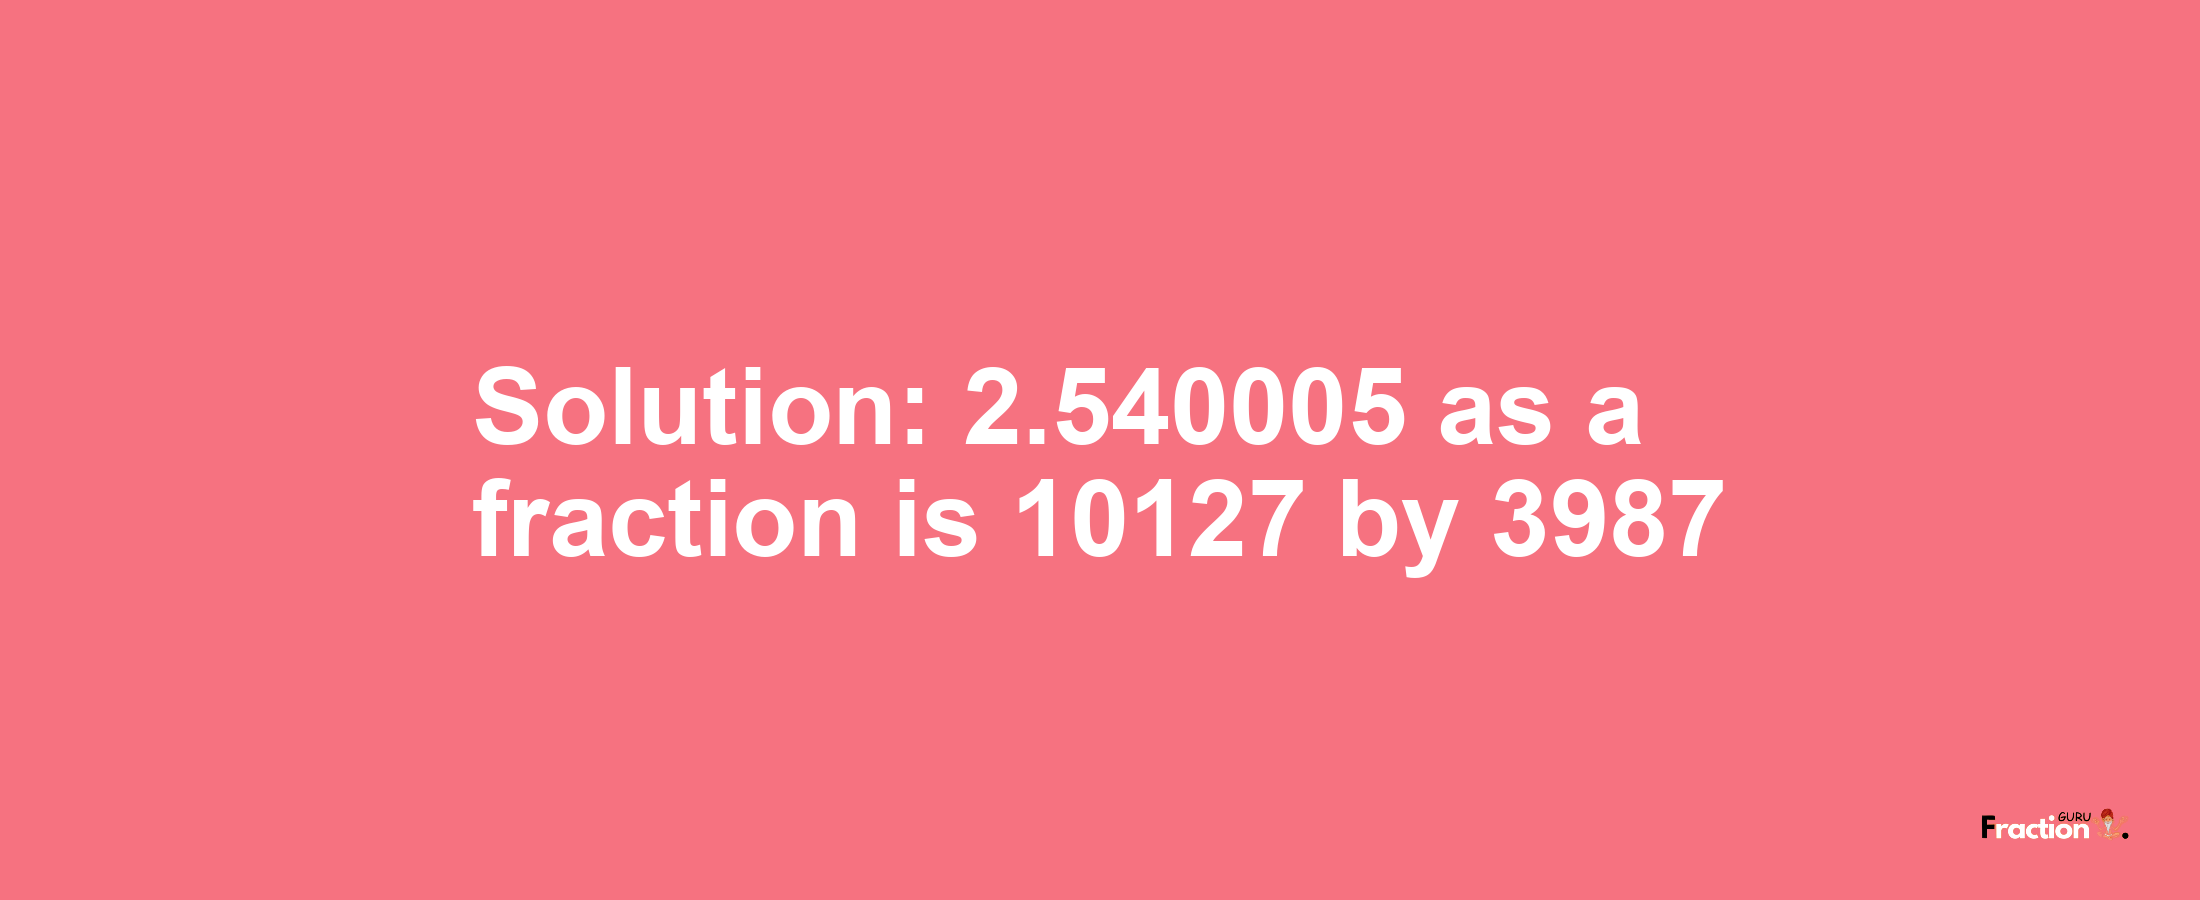 Solution:2.540005 as a fraction is 10127/3987